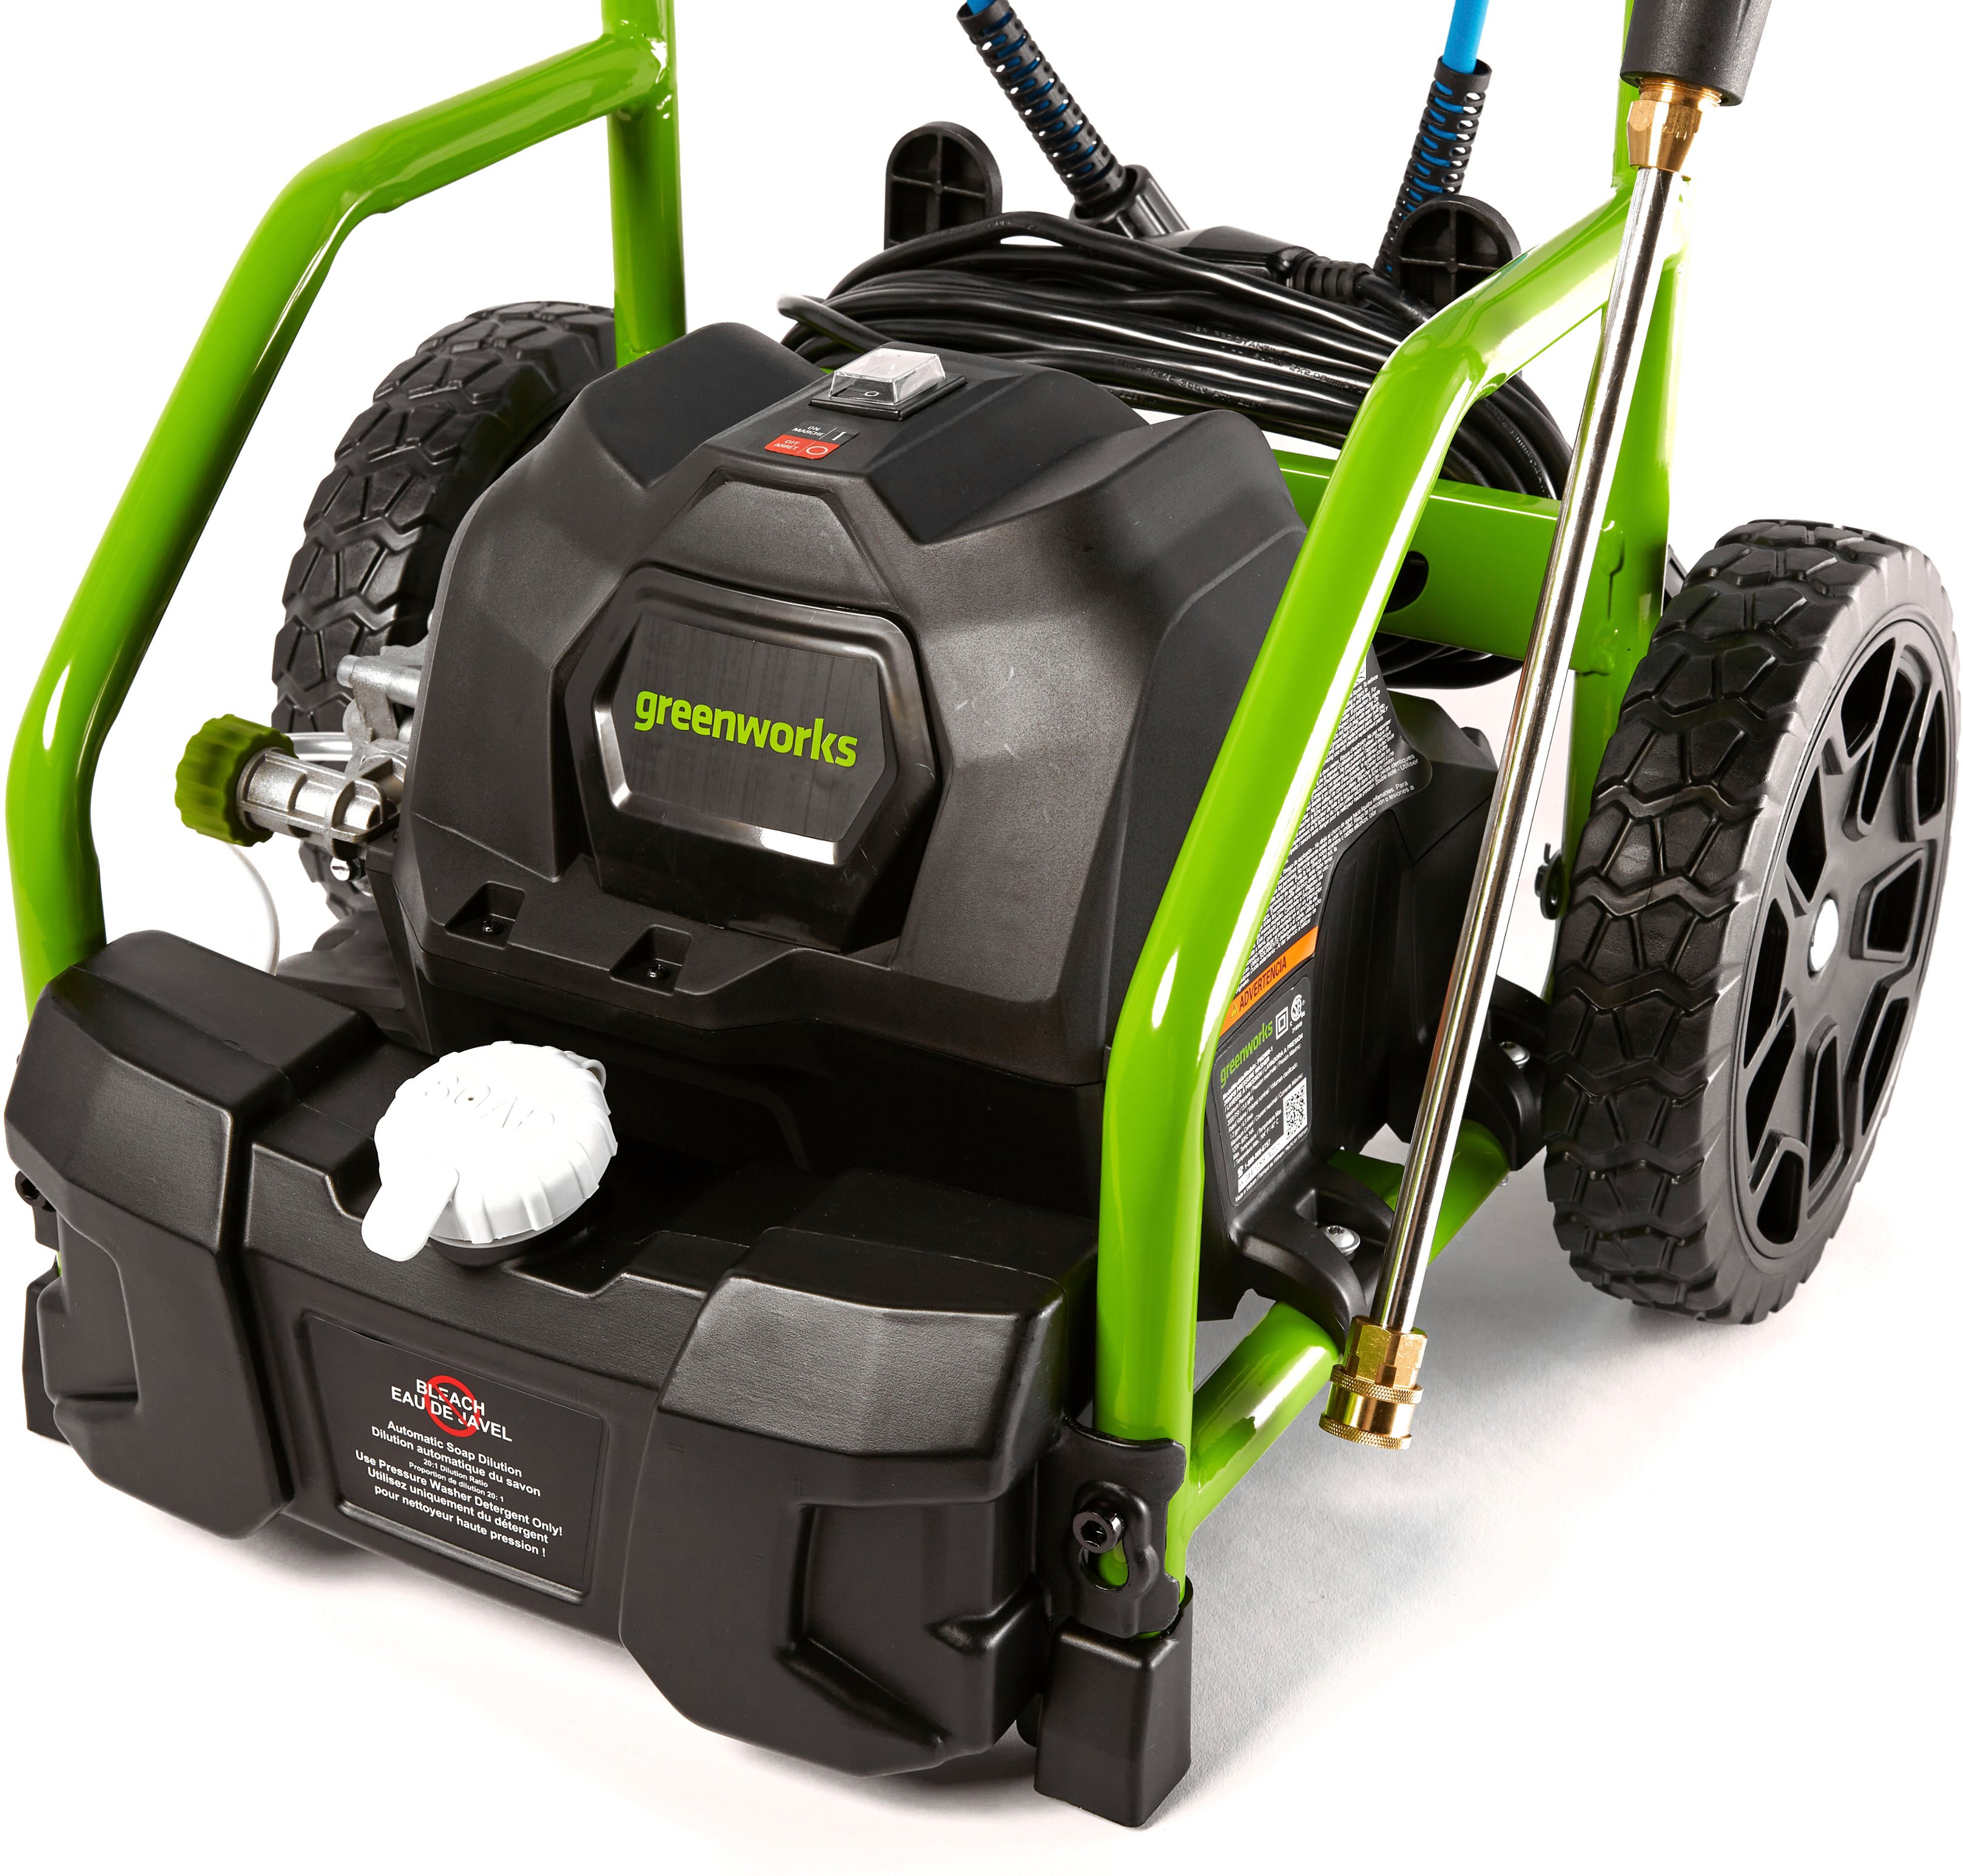 Greenworks Pro Electric Pressure Washer up to 3000 PSI at 2.0 GPM Green  5113902/GPW3001 - Best Buy